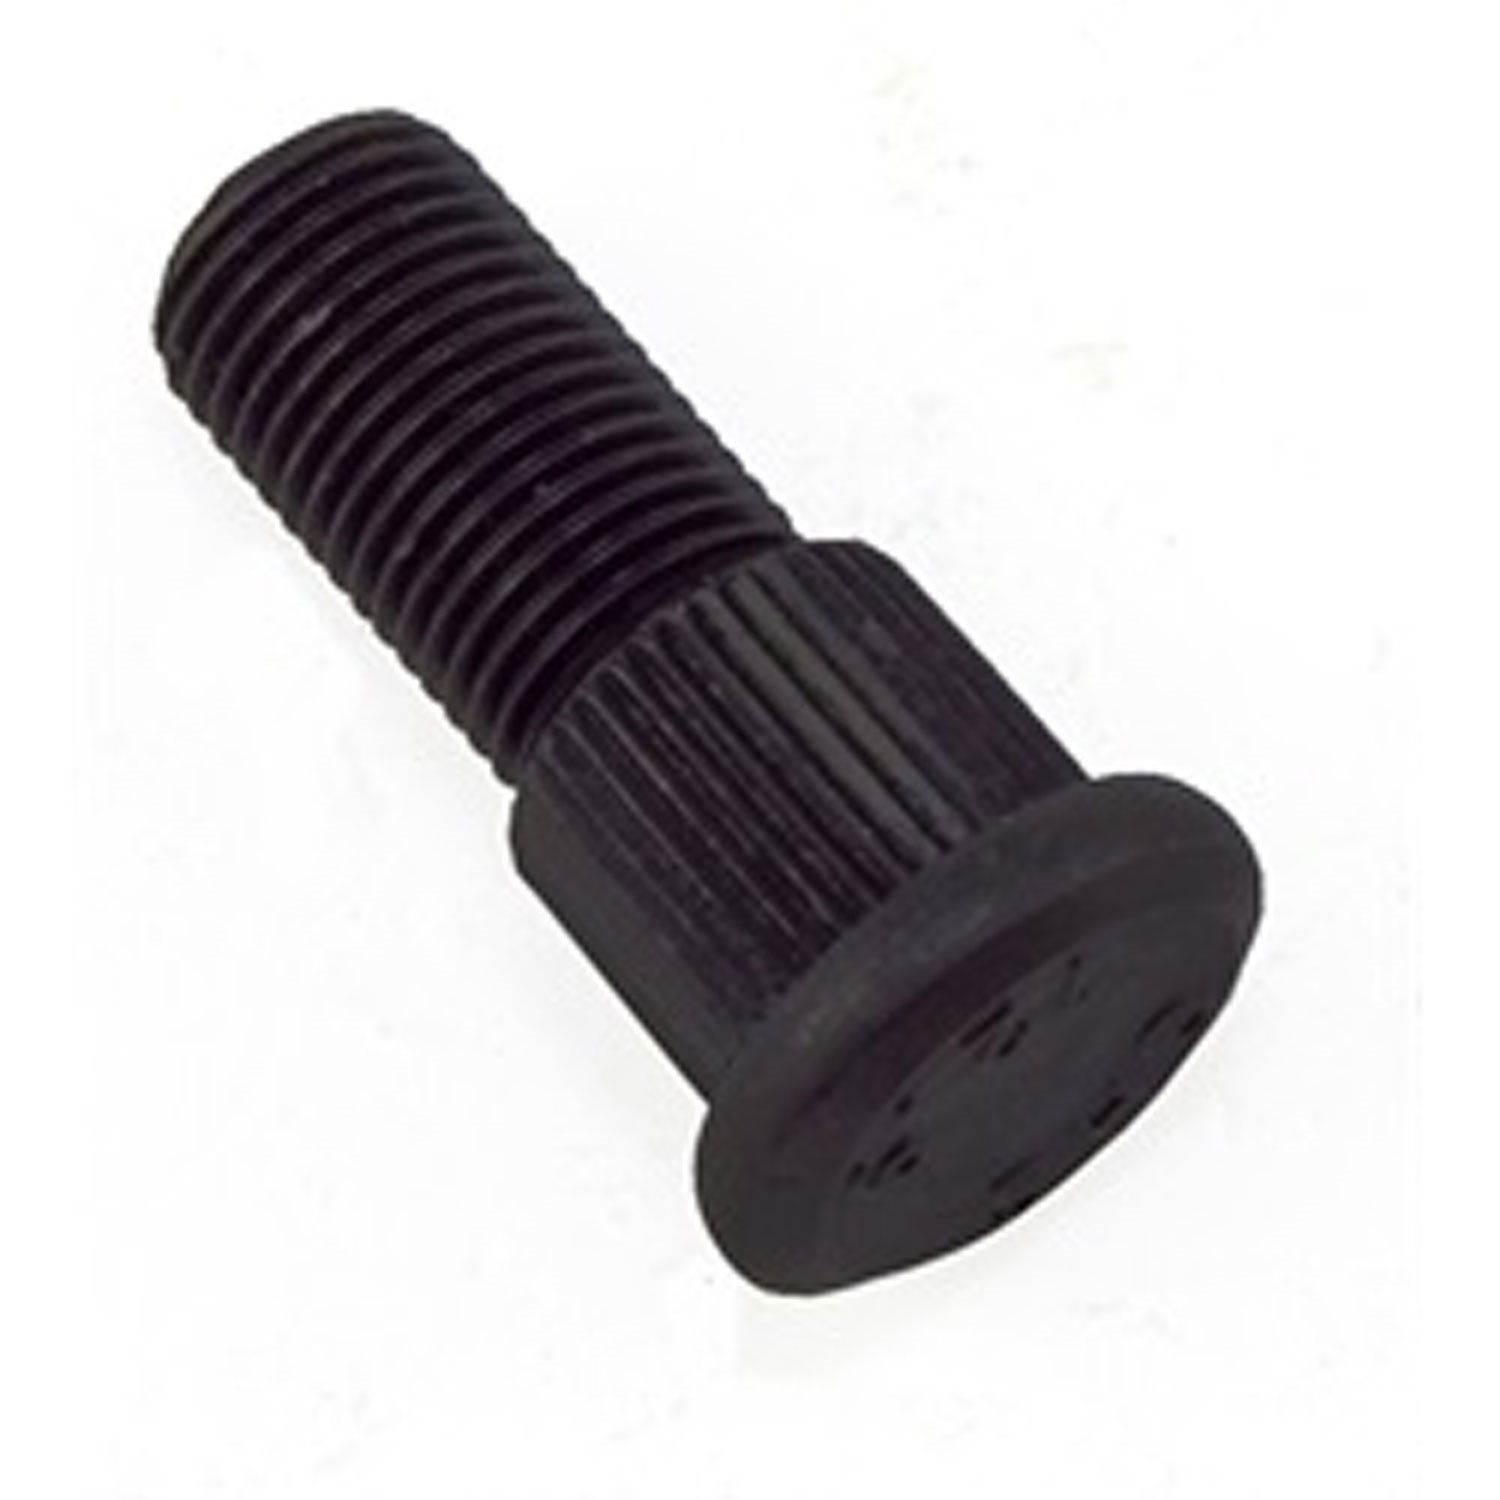 Replacement wheel stud, Fits front or rear axles on 41-45 Ford GPWs 41-45 Willys MBs 46-49 C